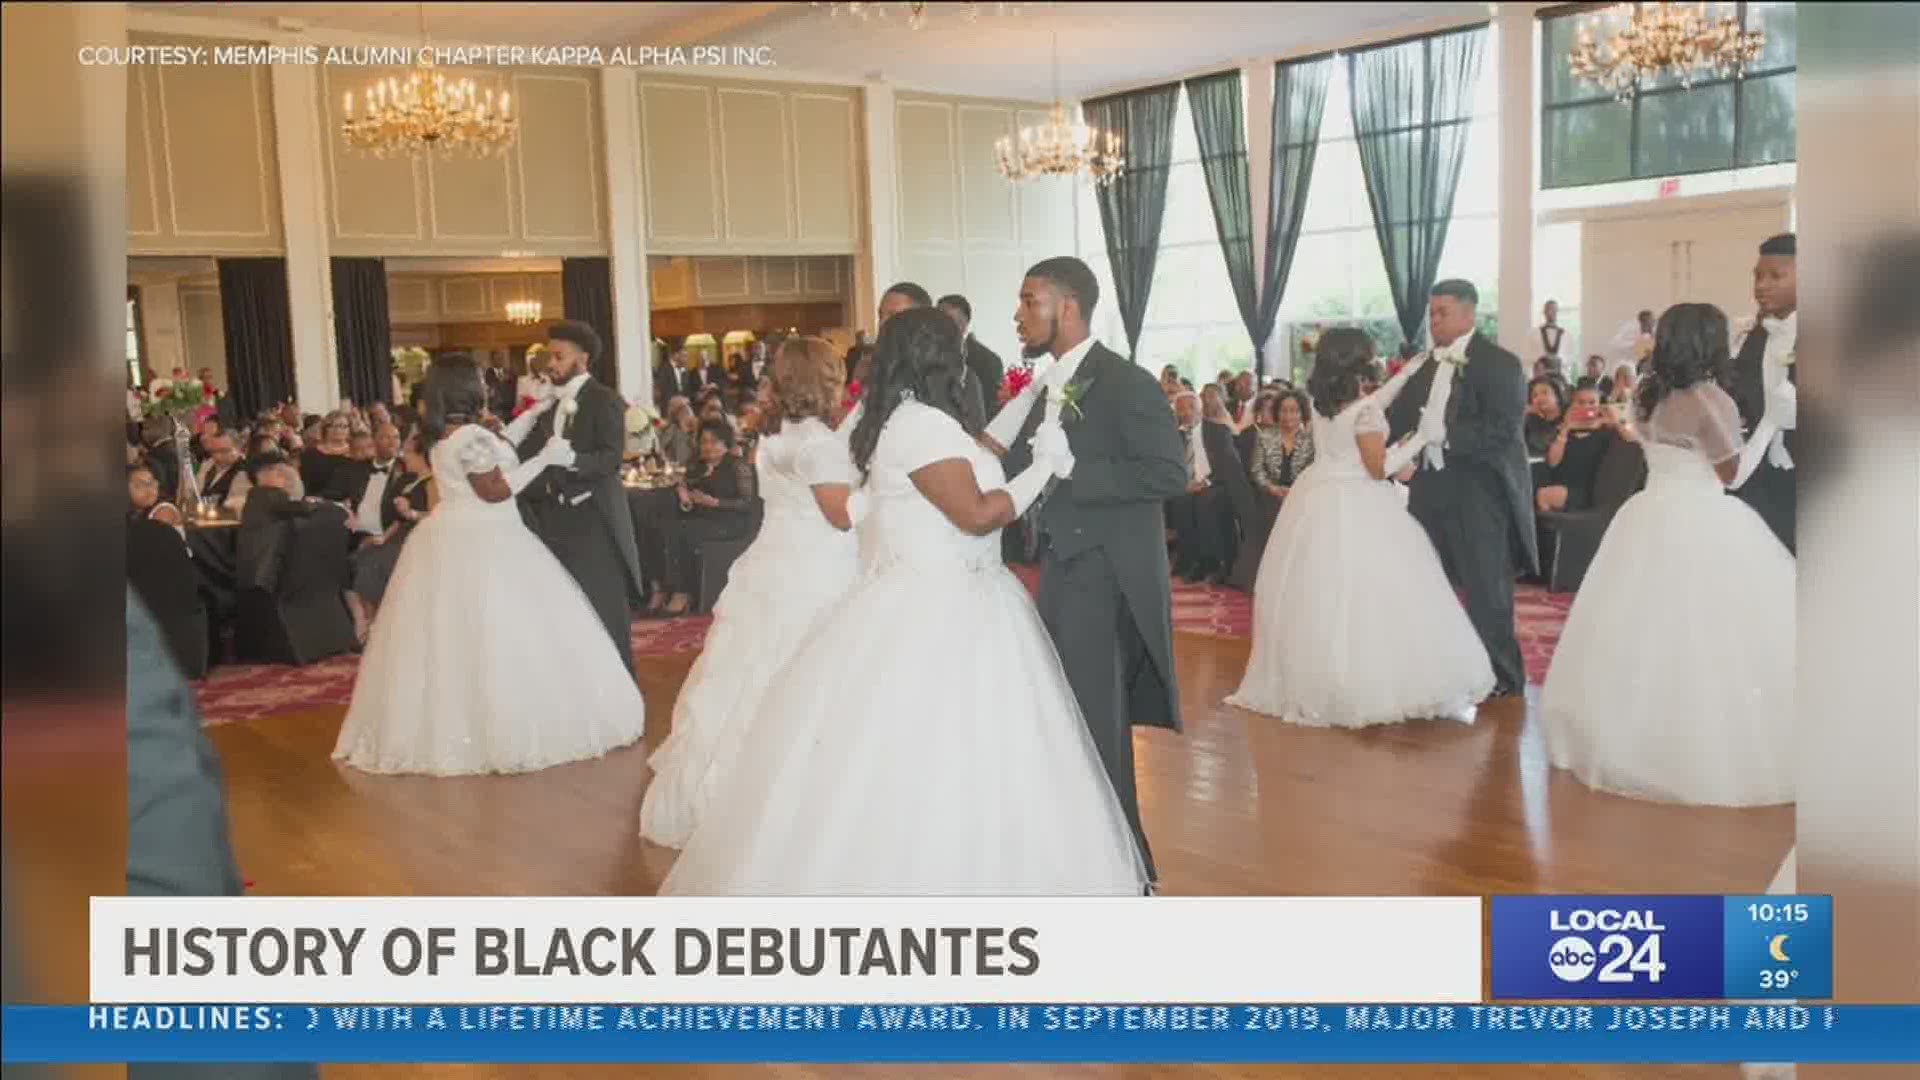 “It was strictly segregated in 1958 which kept you from a lot of social things that most Blacks could not take part in," said Lois Stockton, a Kappa Debutante 1958.